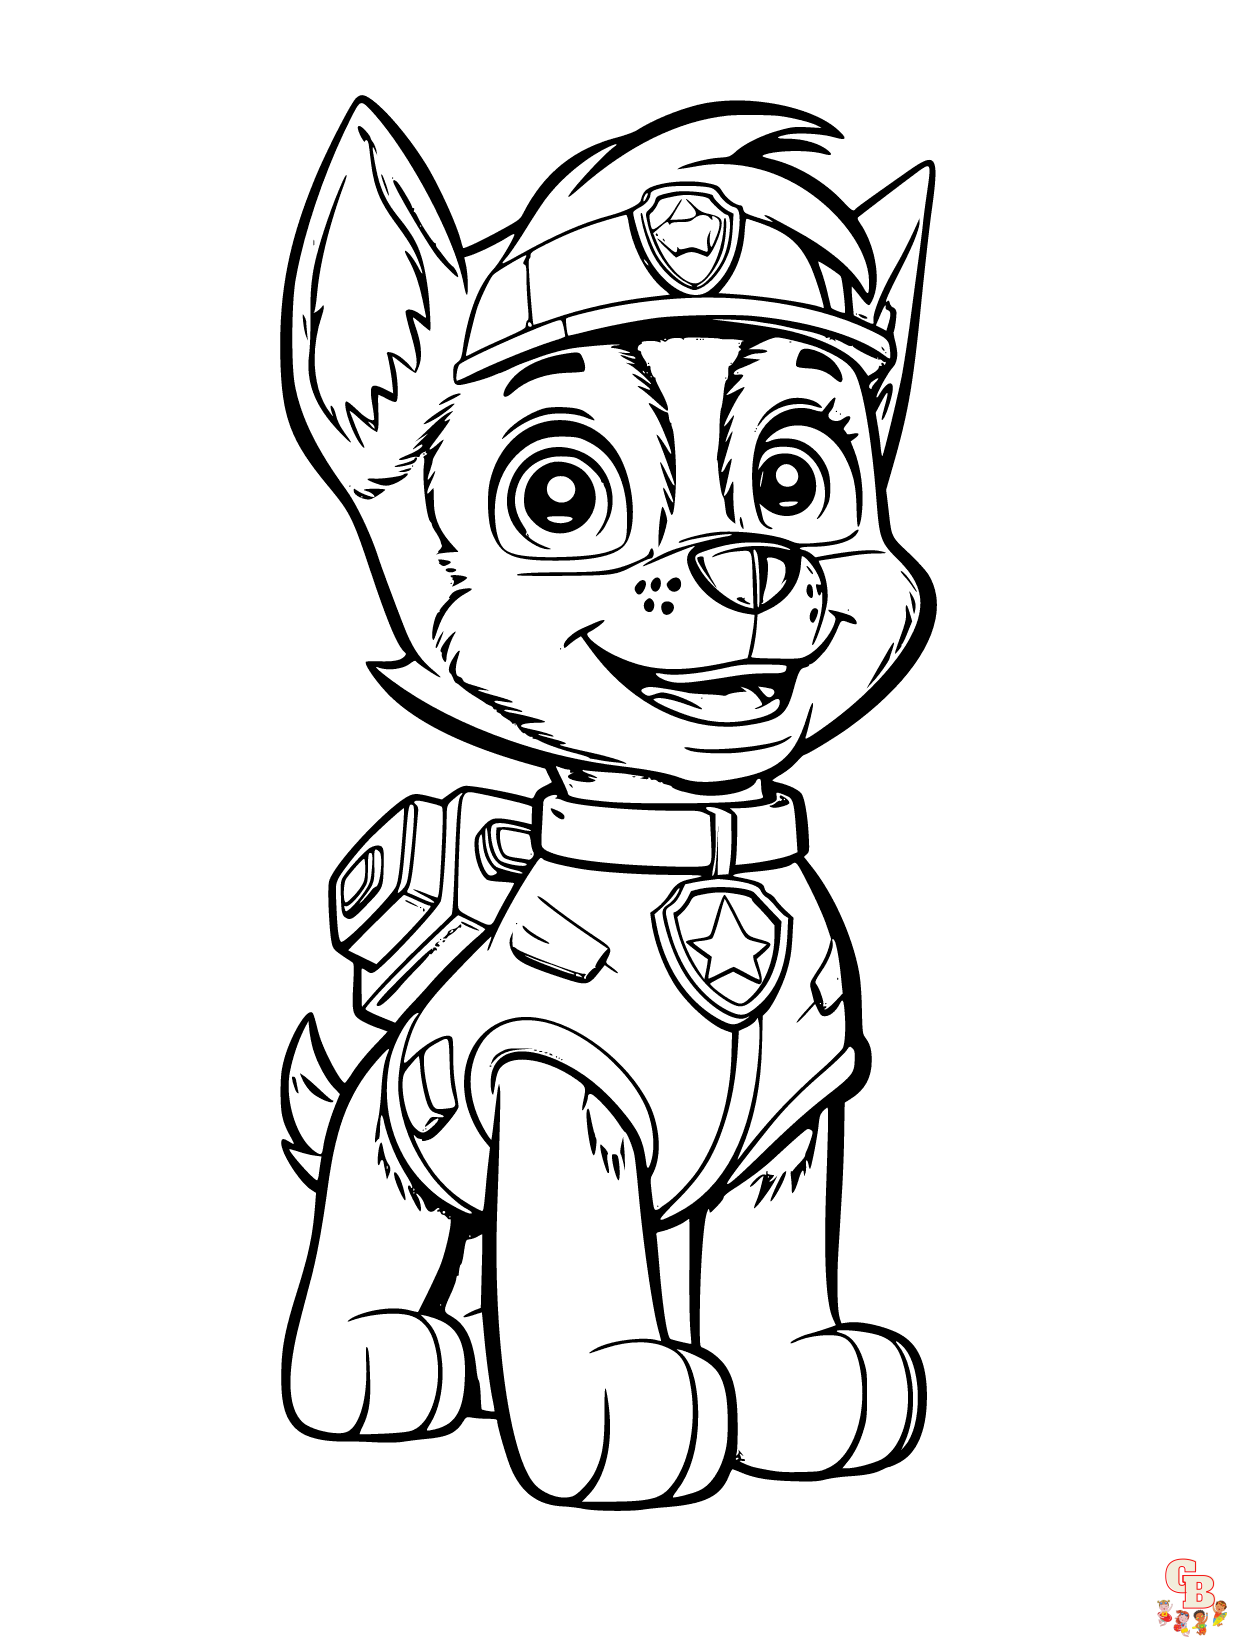 Engaging Paw Patrol Coloring Pages For Fun And Creativity Gbcoloring Atoallinks